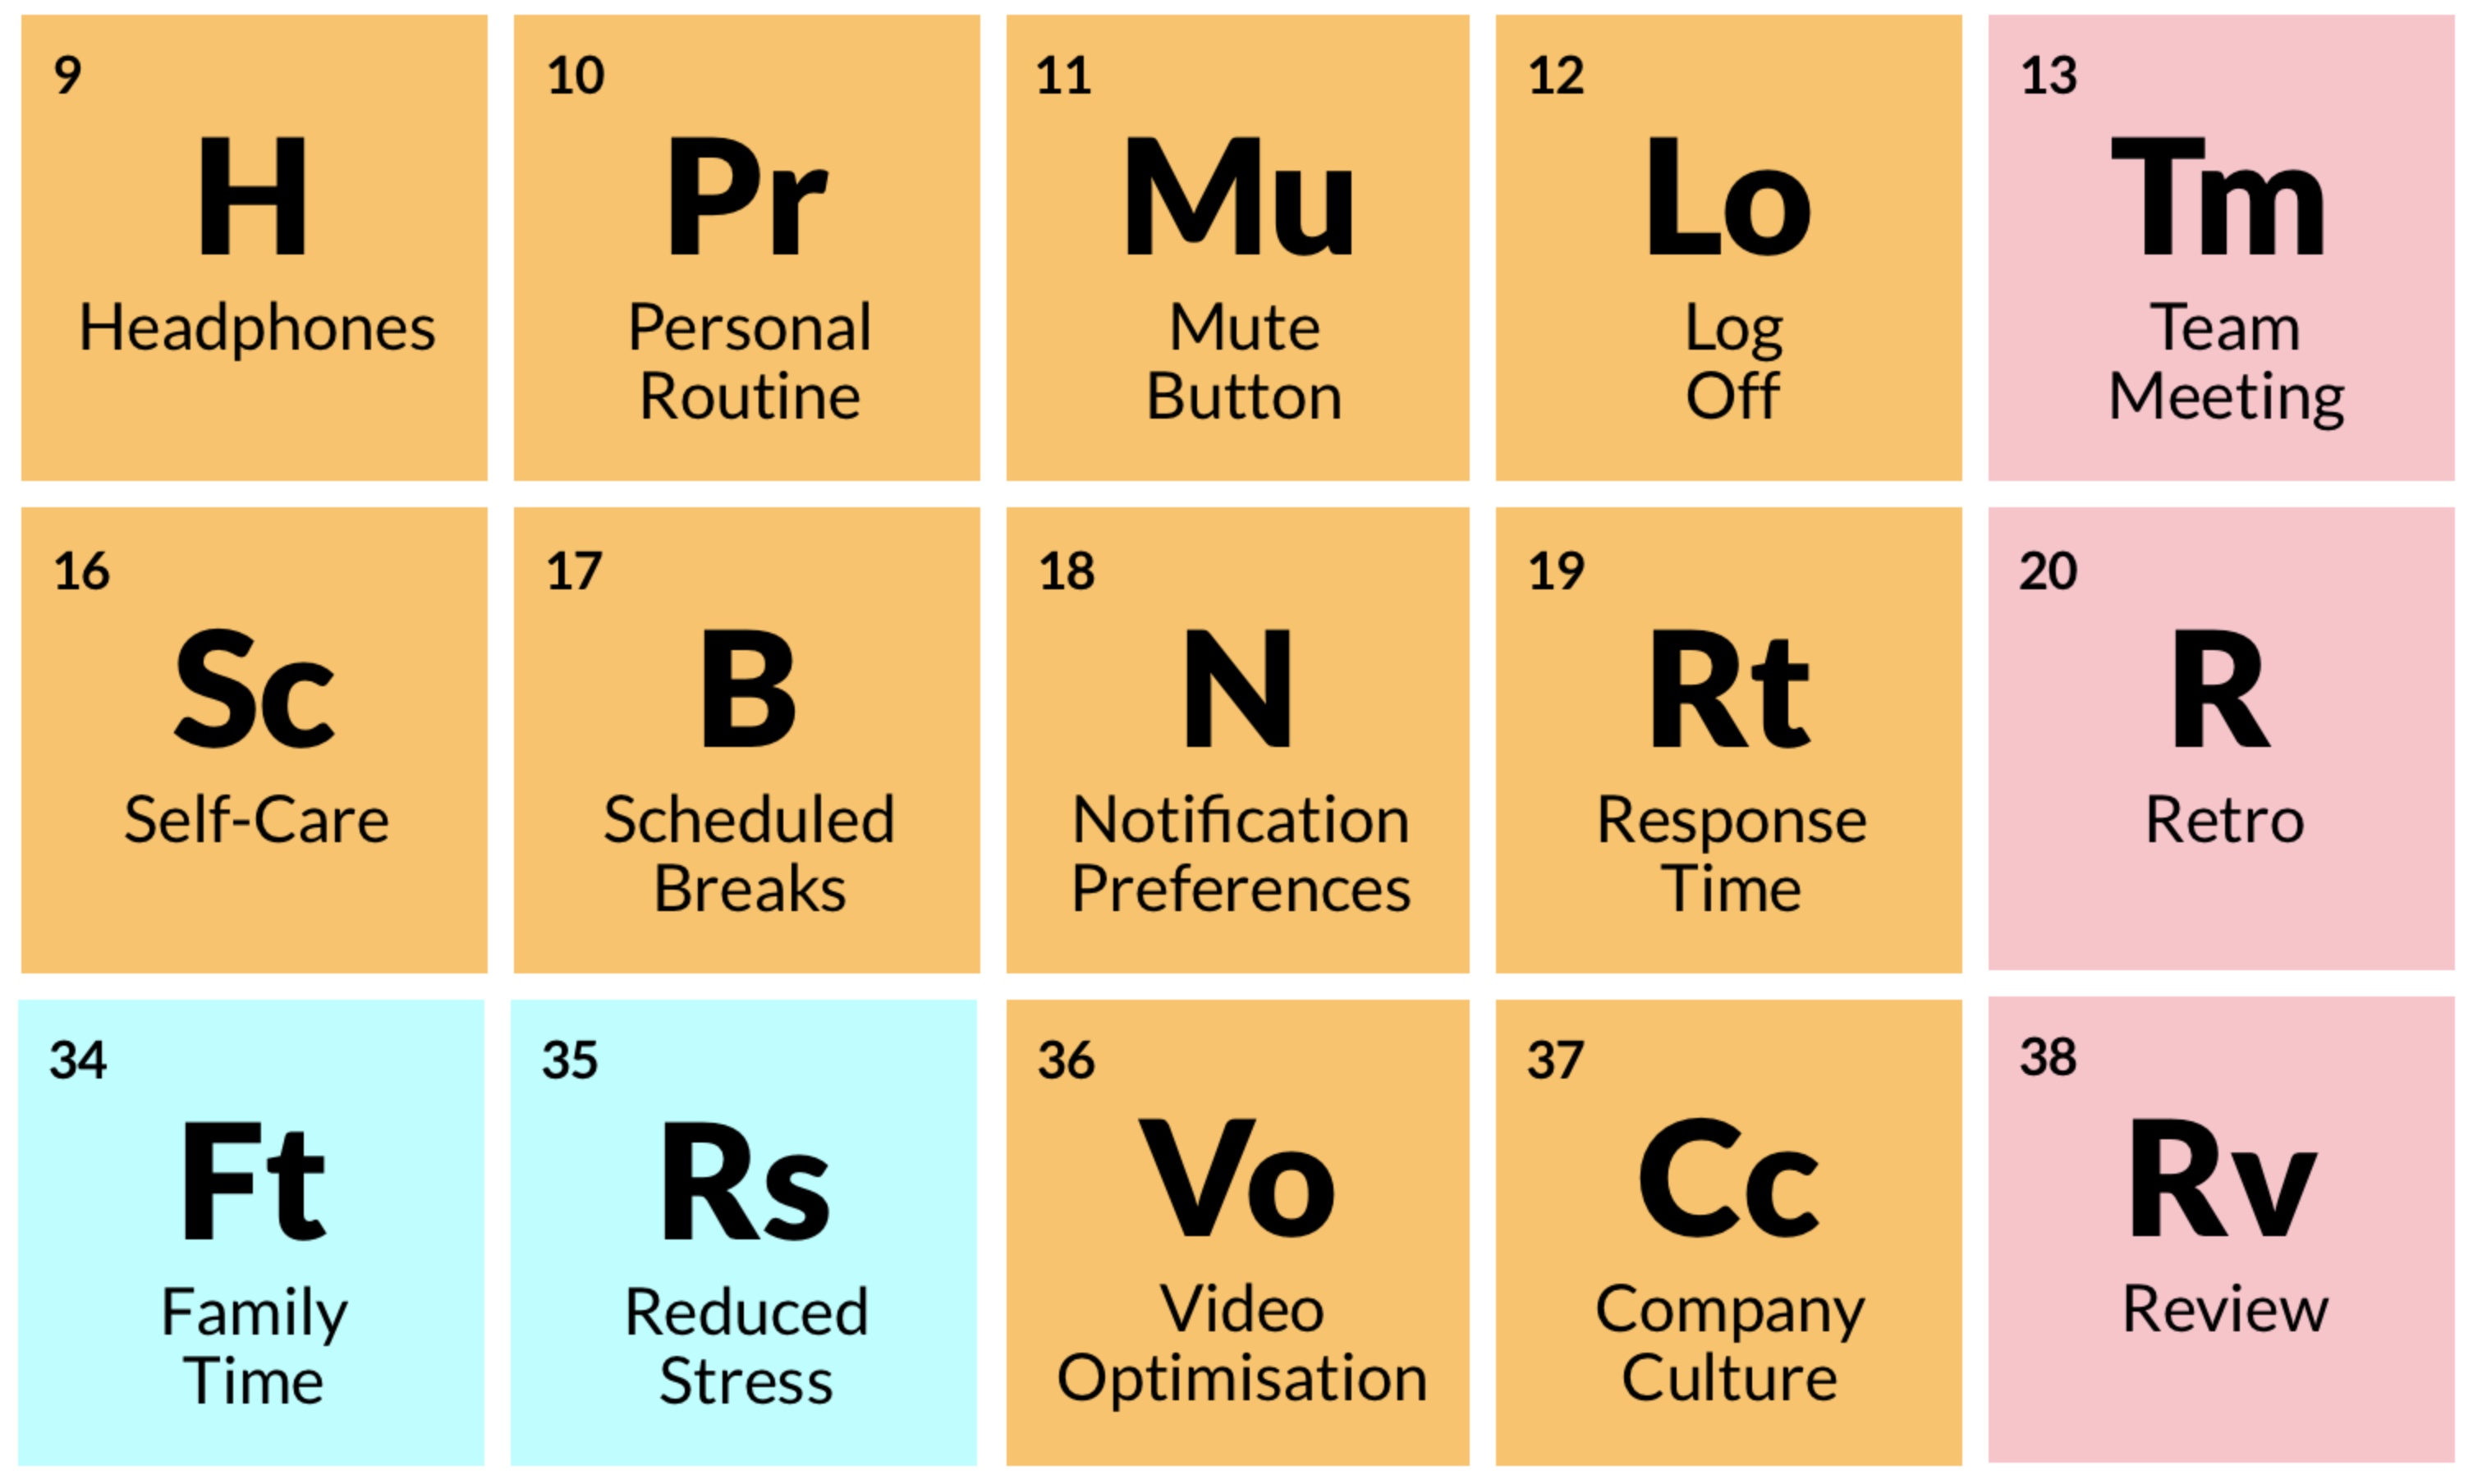 The Periodic Table of Remote Working